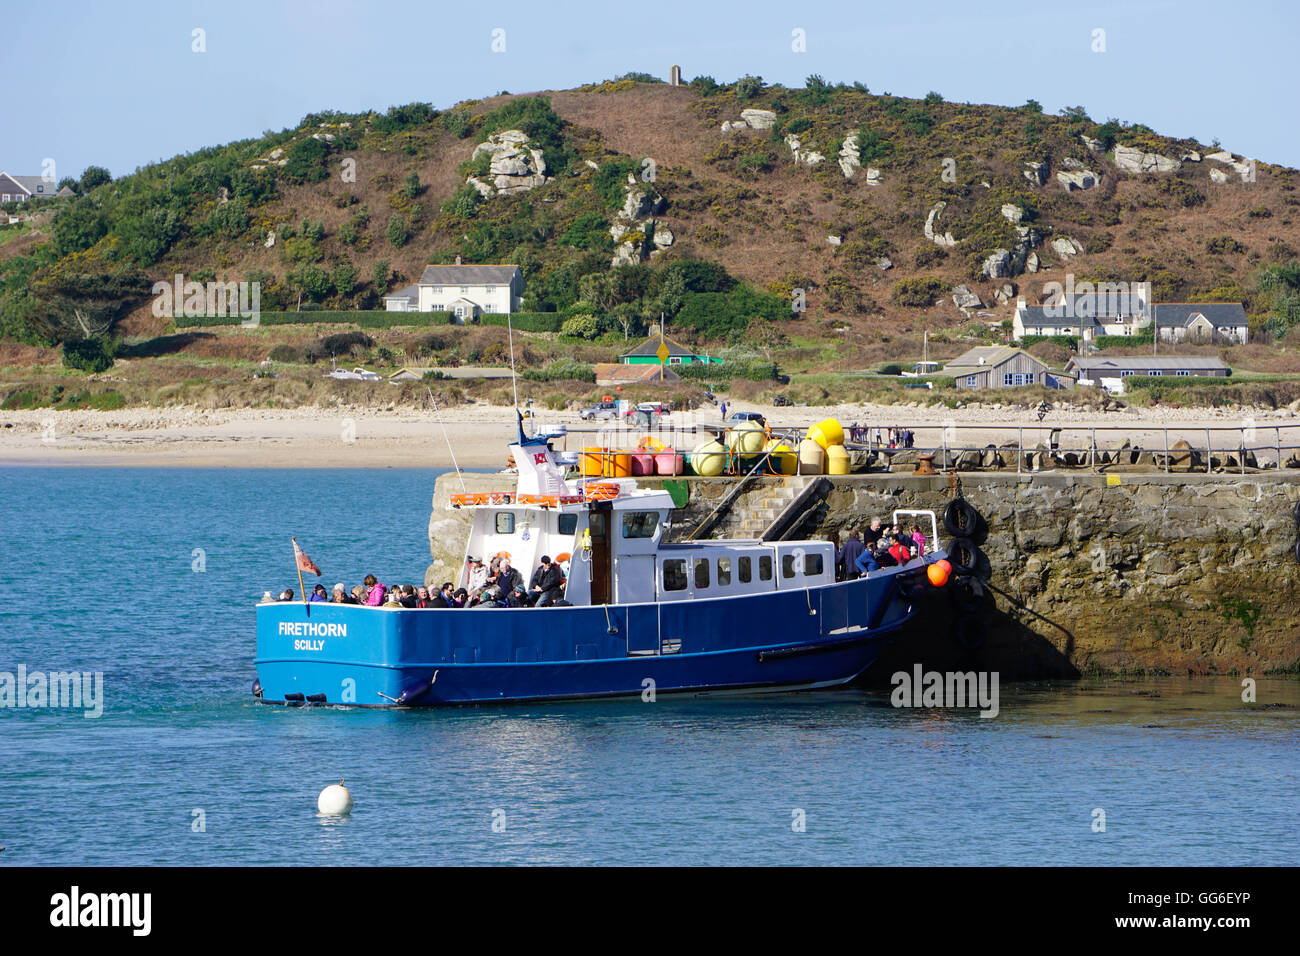 Travellers boarding boat at New Grimsby Quay on Tresco with Bryher in background, Isles of Scilly, England, United Kingdom Stock Photo